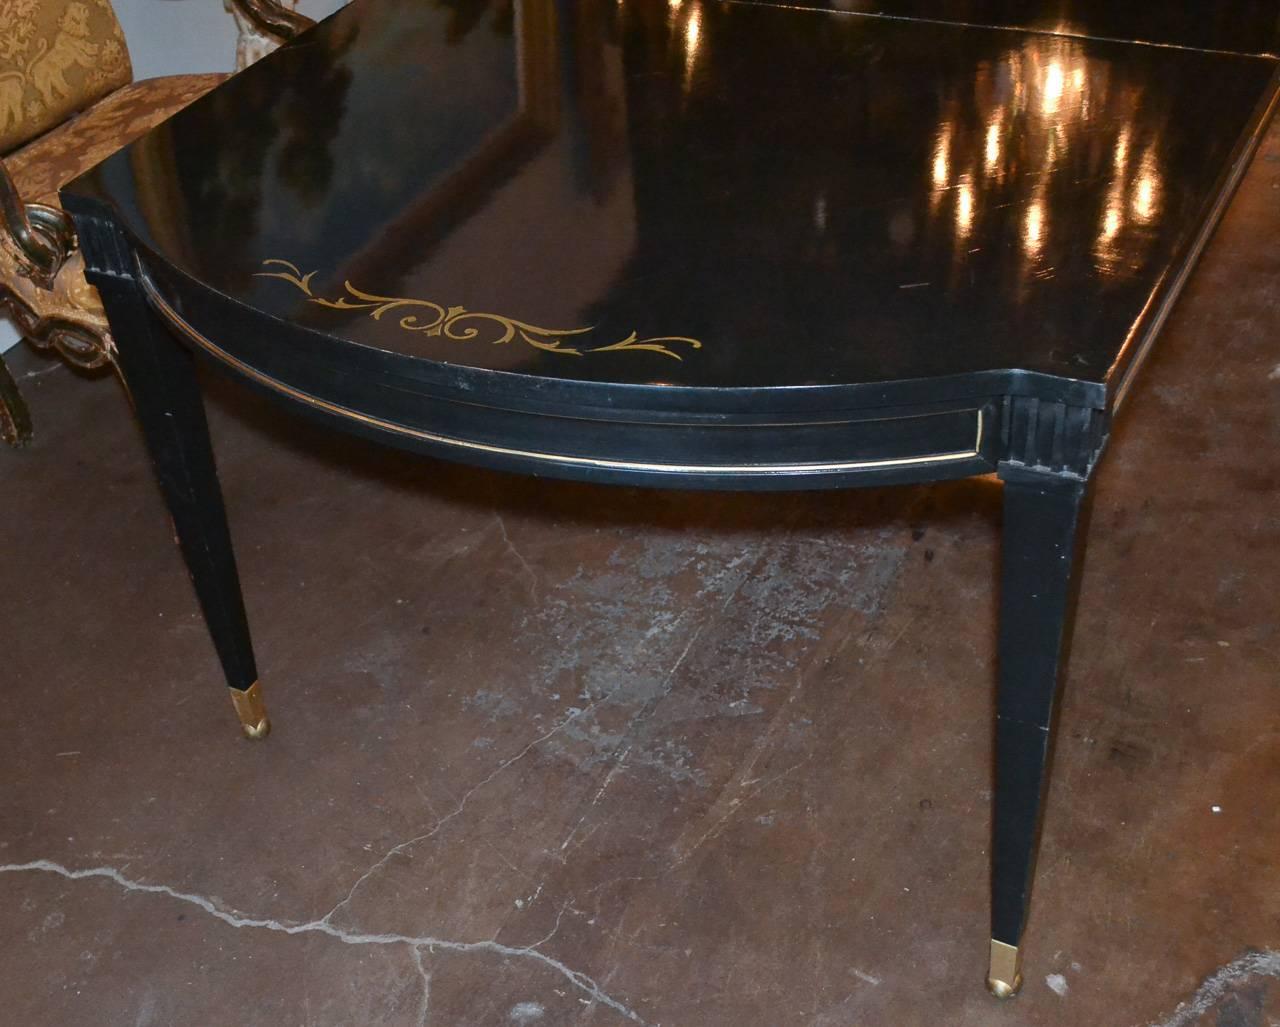 Versatile French neoclassical black lacquered dining table. Having parcel-gilt detailing and trim, foliate inlays on top, shaped ends, and resting on tapered legs. Exhibiting a beautiful patina and clean lines that work in countless styles of decor!